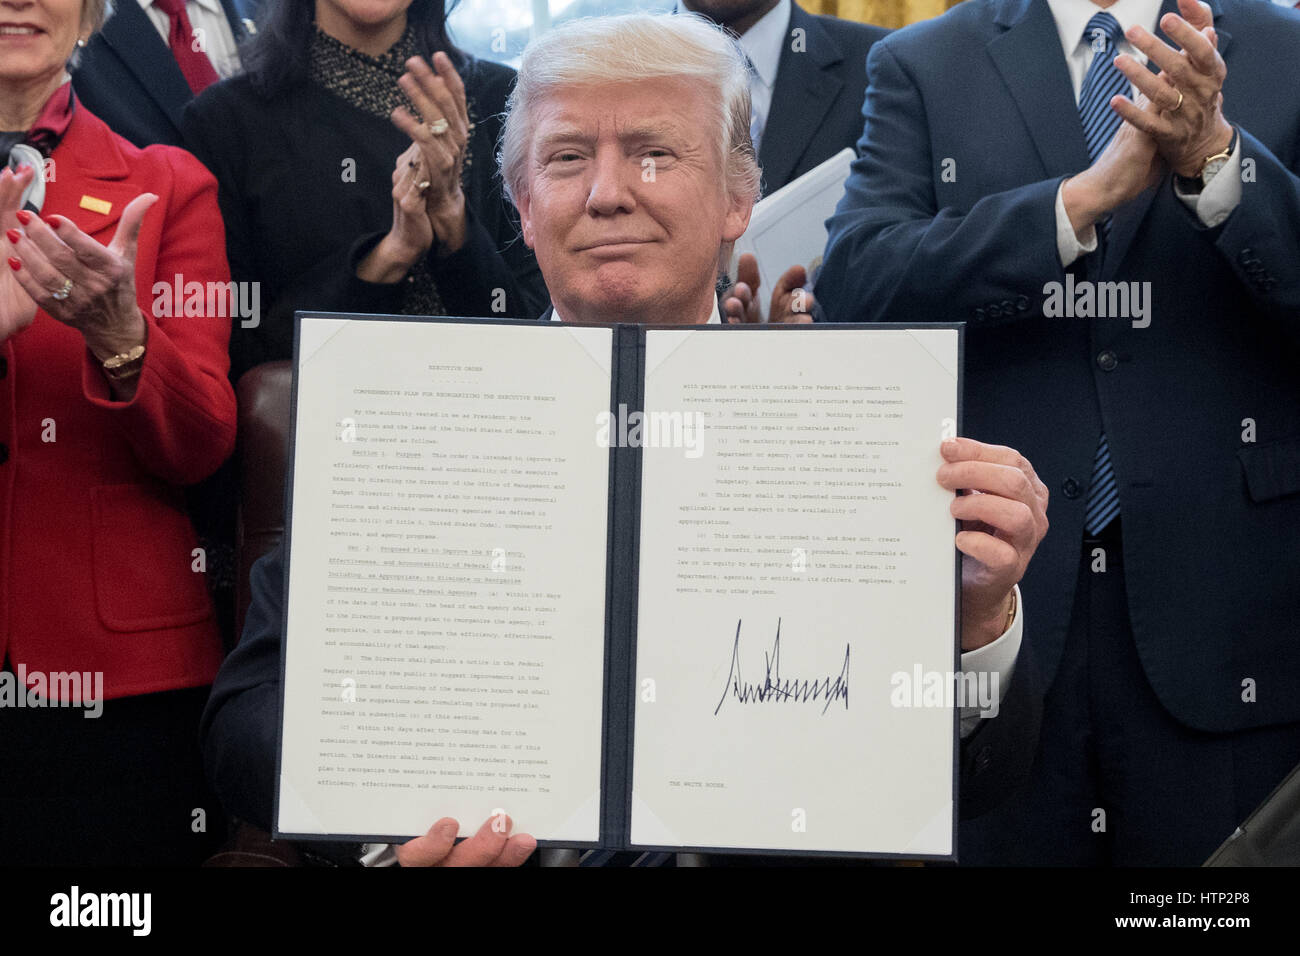 Washington DC, USA 13th March, 2017 US President Donald J Trump shows an executive order entitled, 'Comprehensive Plan for Reorganizing the Executive Branch', after signing it beside members of his Cabinet in the Oval Office of the White House in Washingt Stock Photo